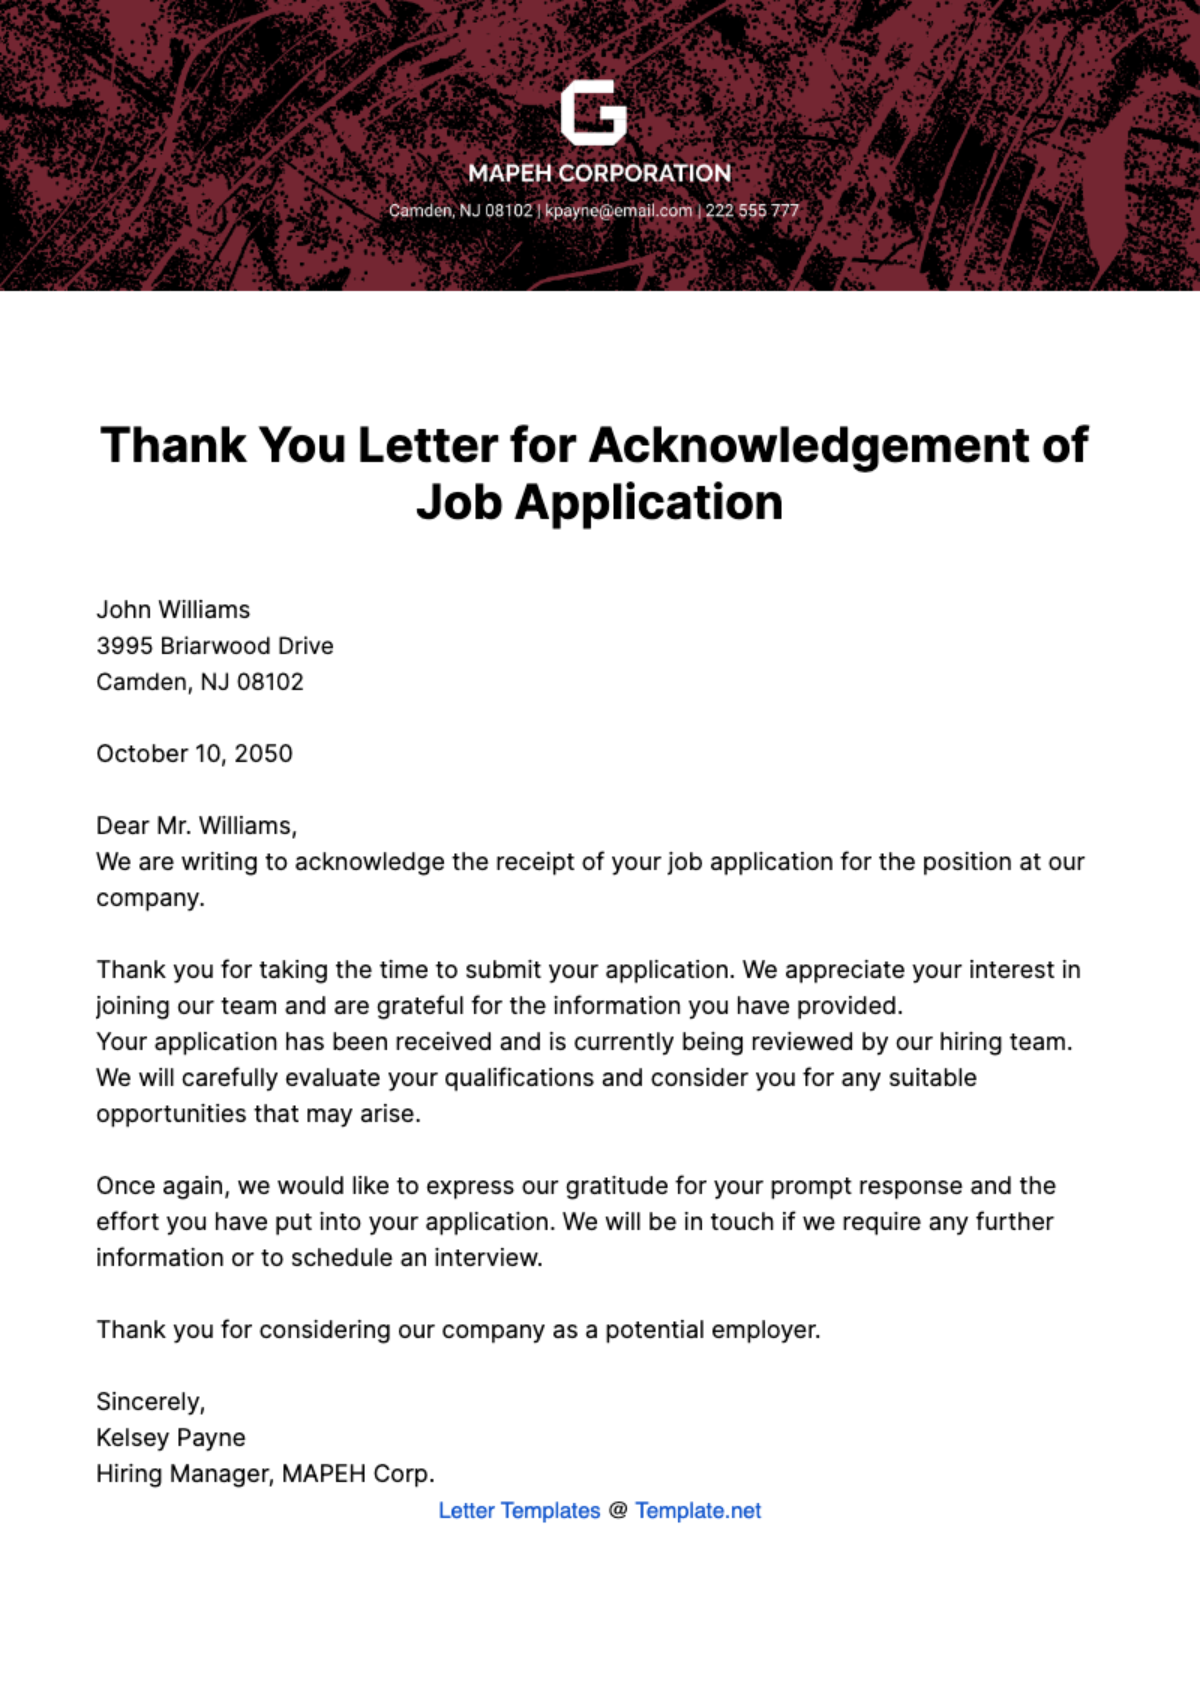 Thank you Letter for Acknowledgement of Job Application Template